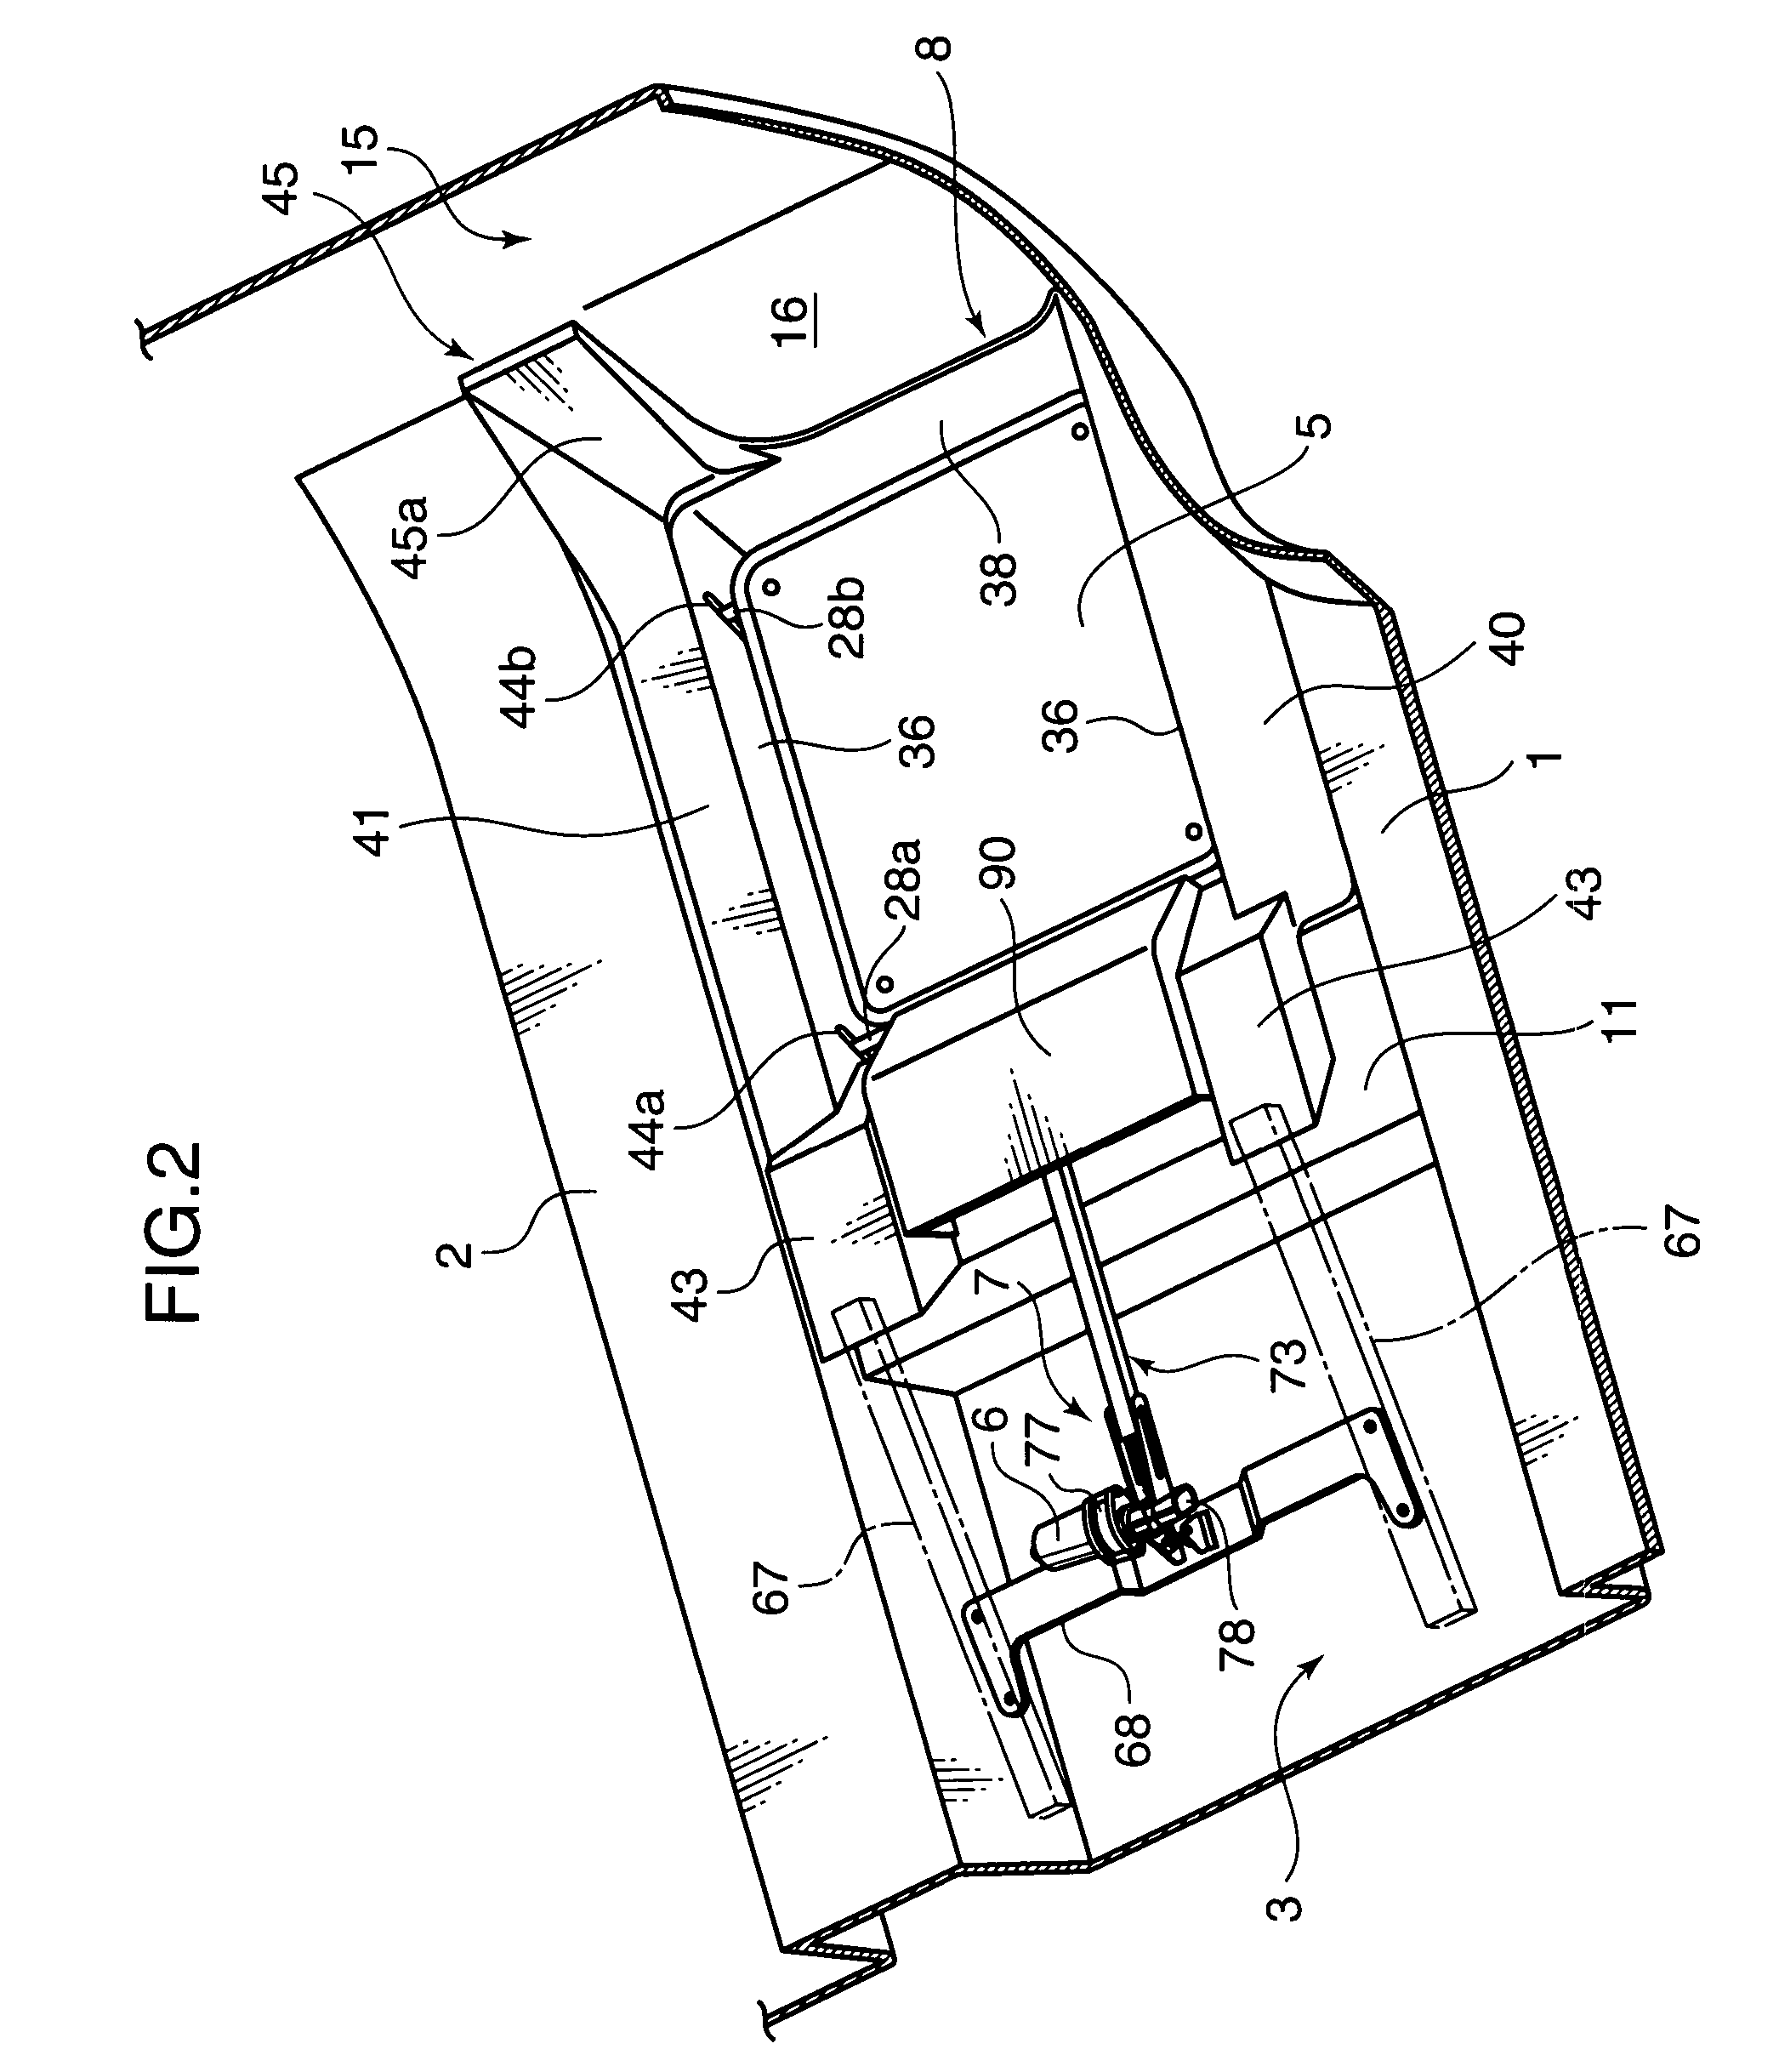 Movable floor apparatus for vehicle